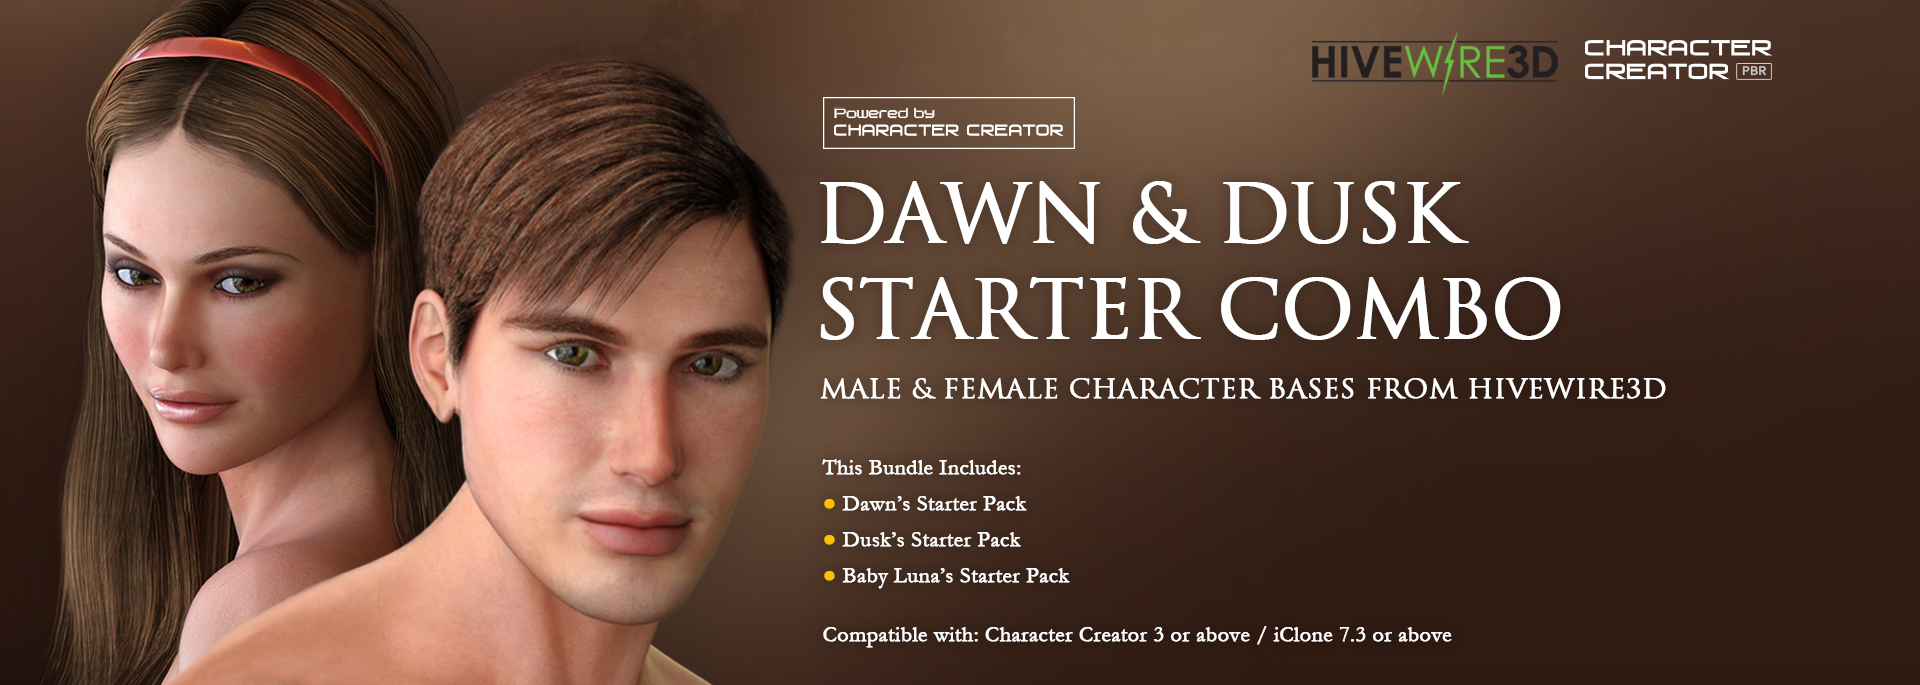 Character Creator Content Pack - Dawn & Dusk Starter Combo